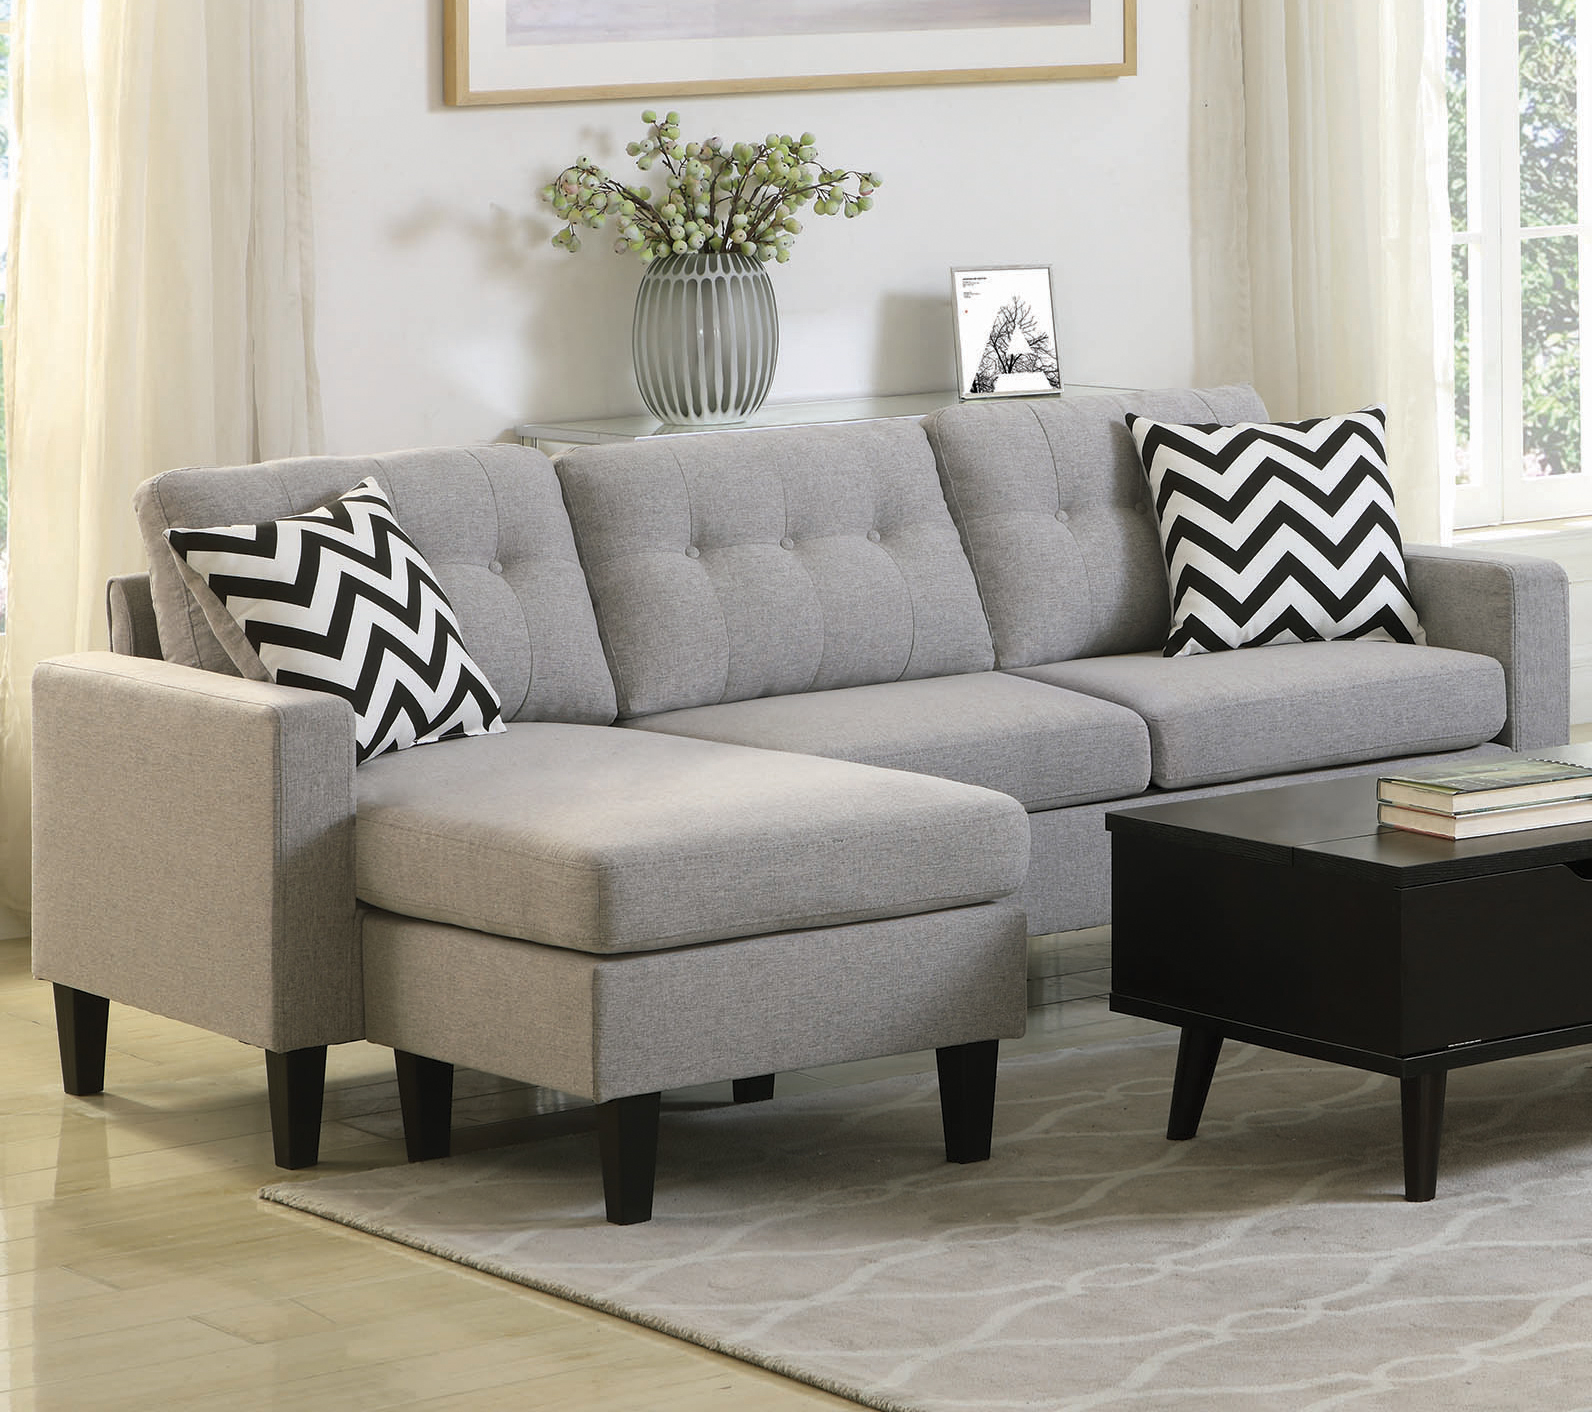 Small sectional sofas for any living room size